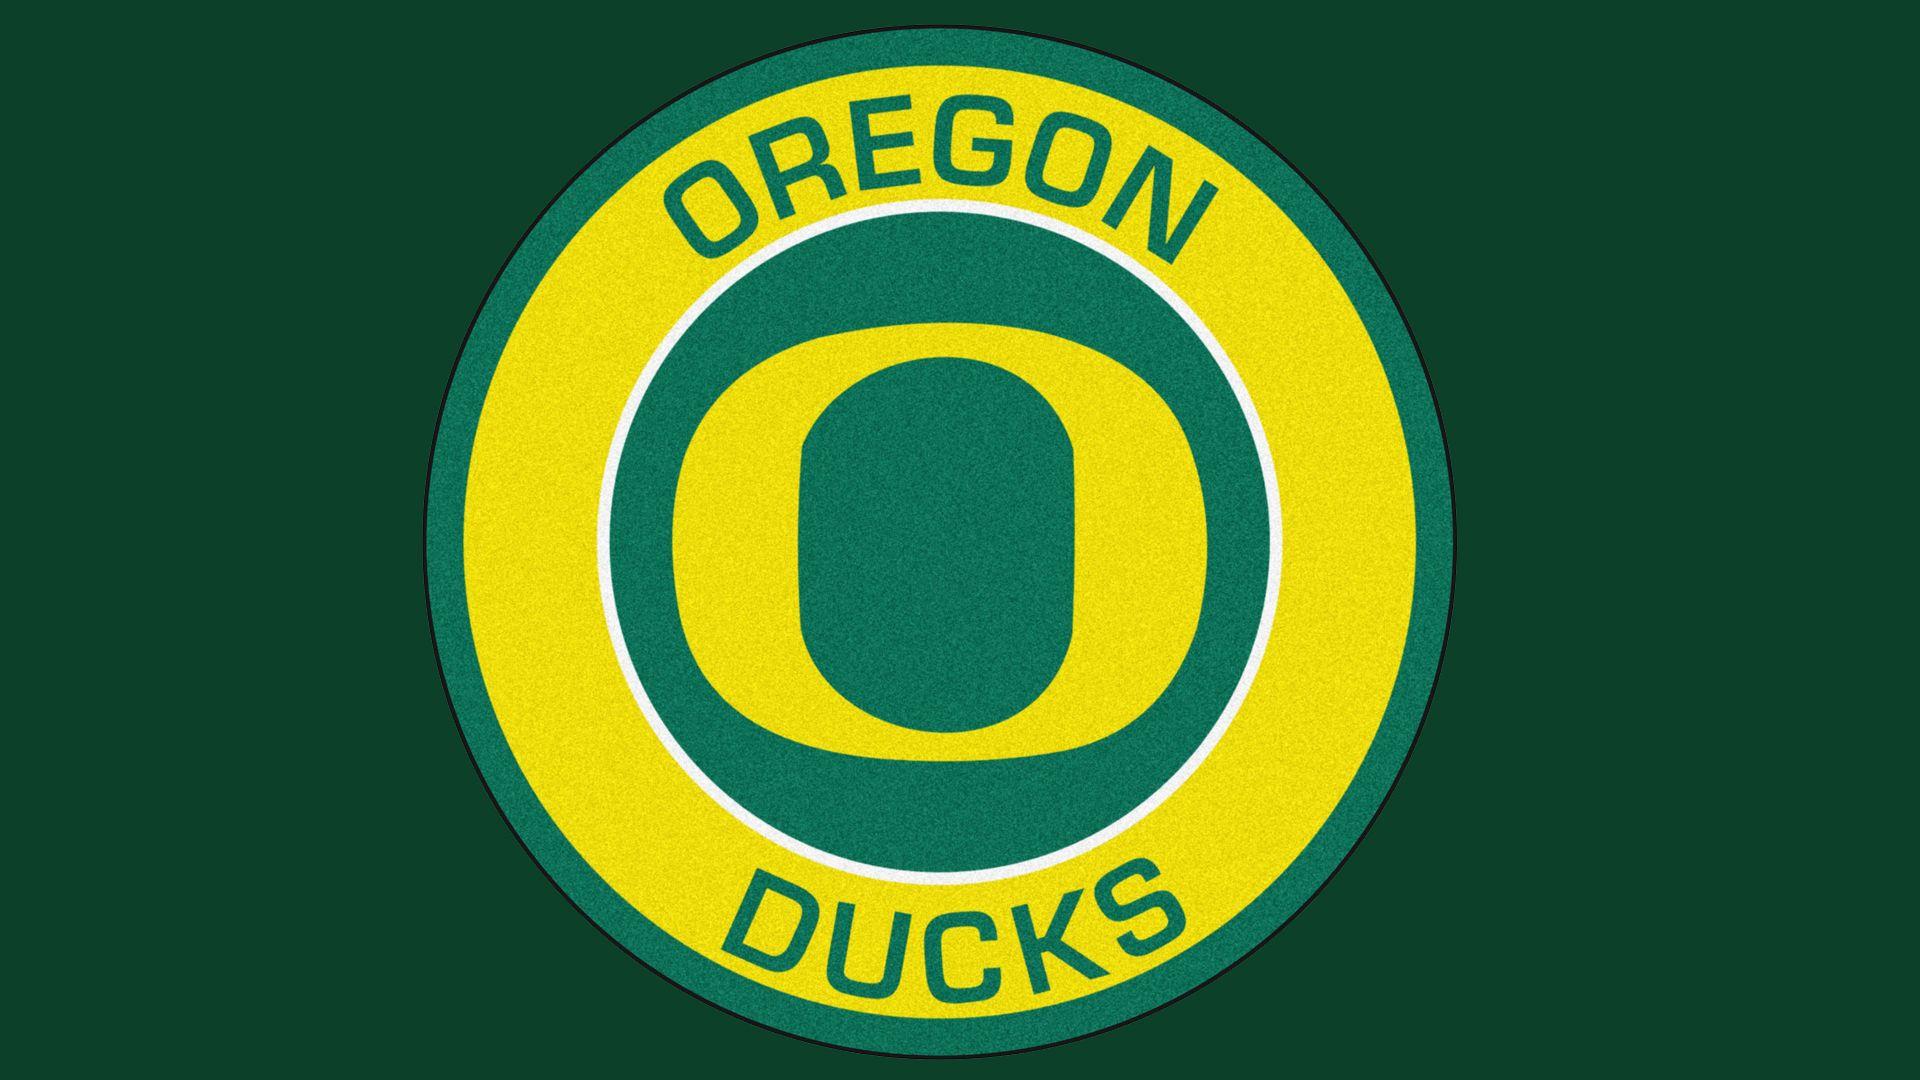 Oregon Logo - Oregon Ducks Logo, Oregon Ducks Symbol, Meaning, History and Evolution